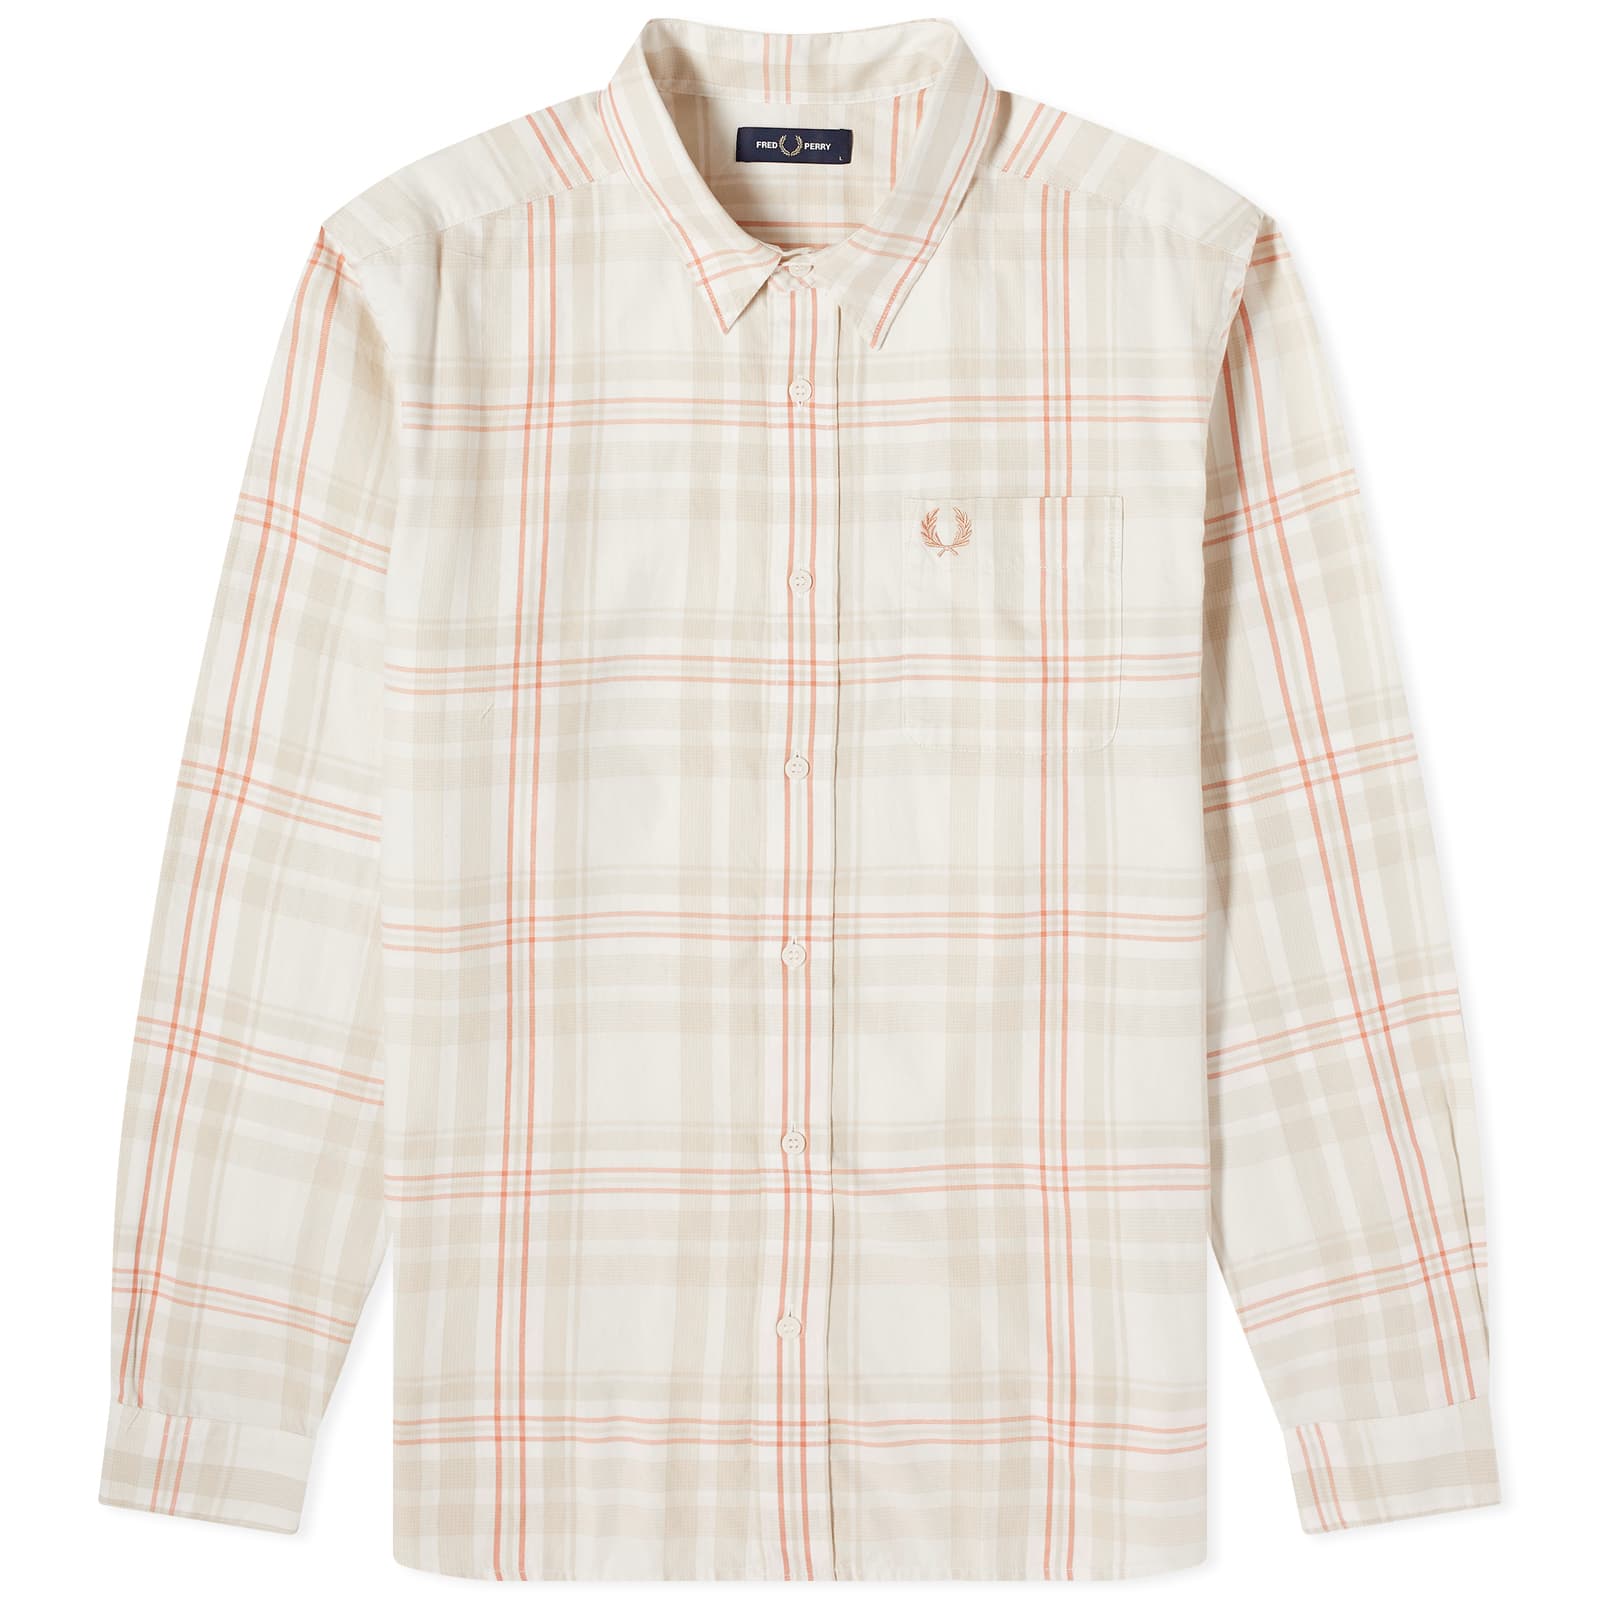 Рубашка Fred Perry Twill Tartan, экрю рубашка fred perry panel polo цвет whisky brown